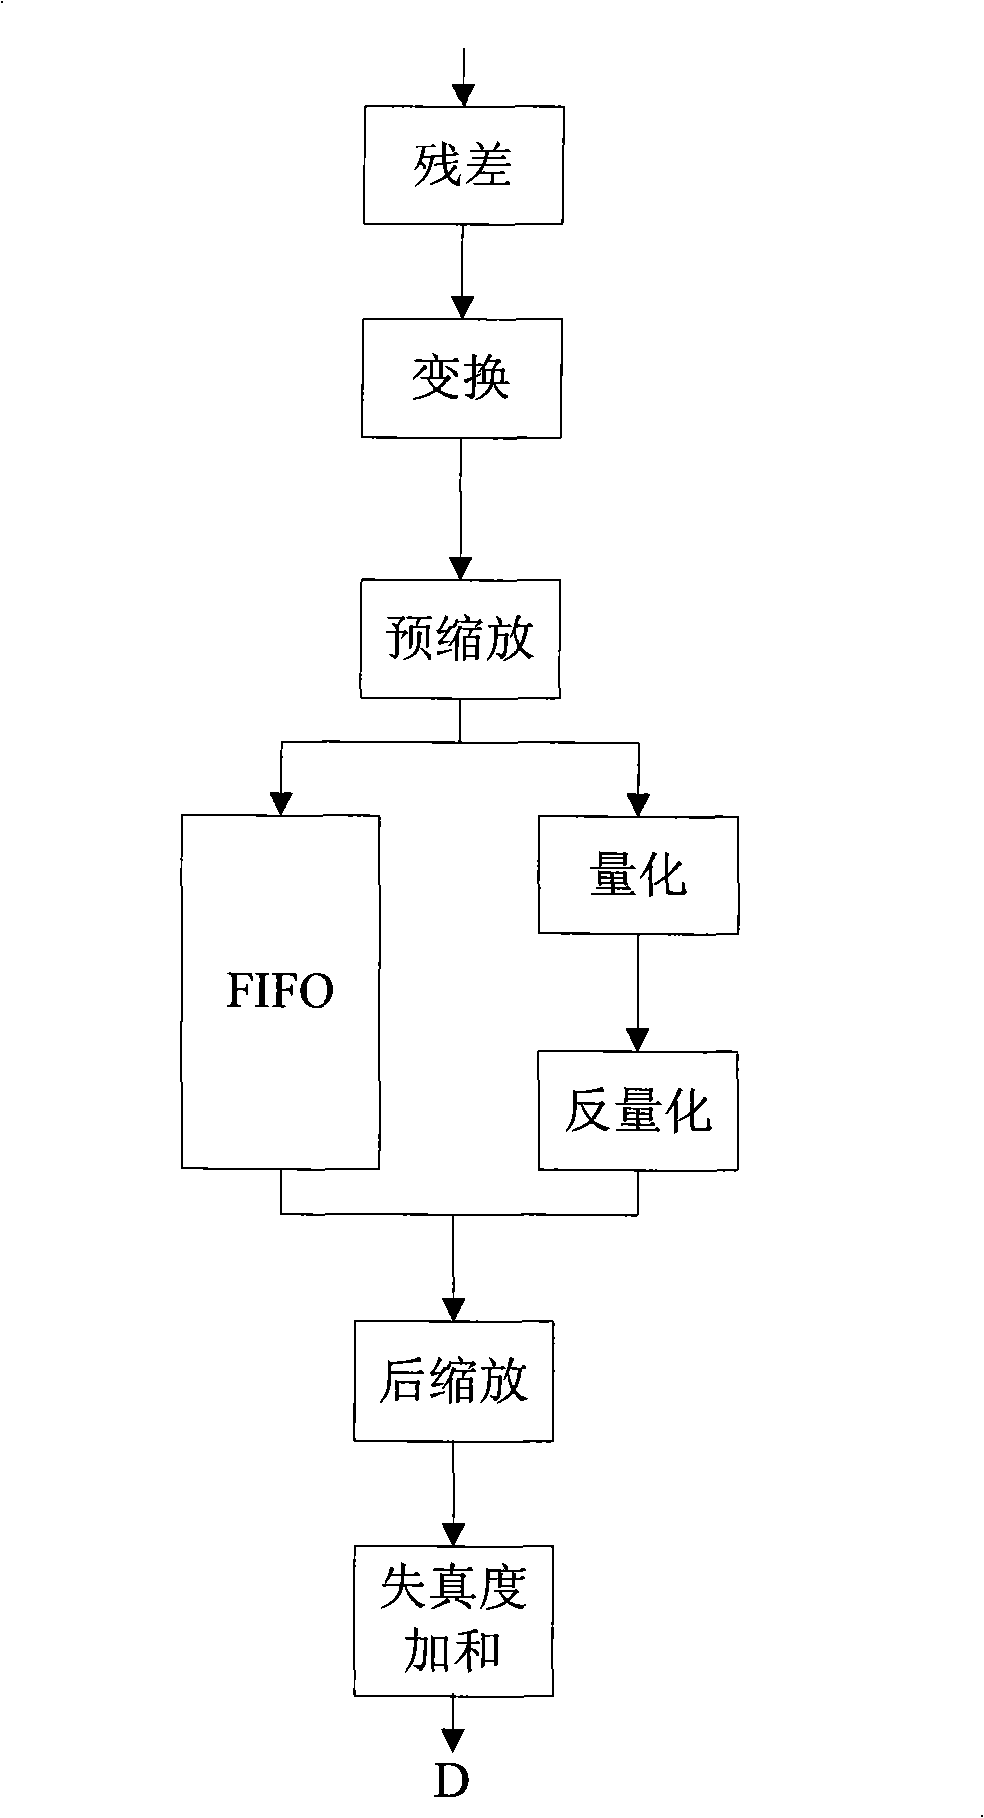 Method and apparatus for estimating video distortion in AVS video encode